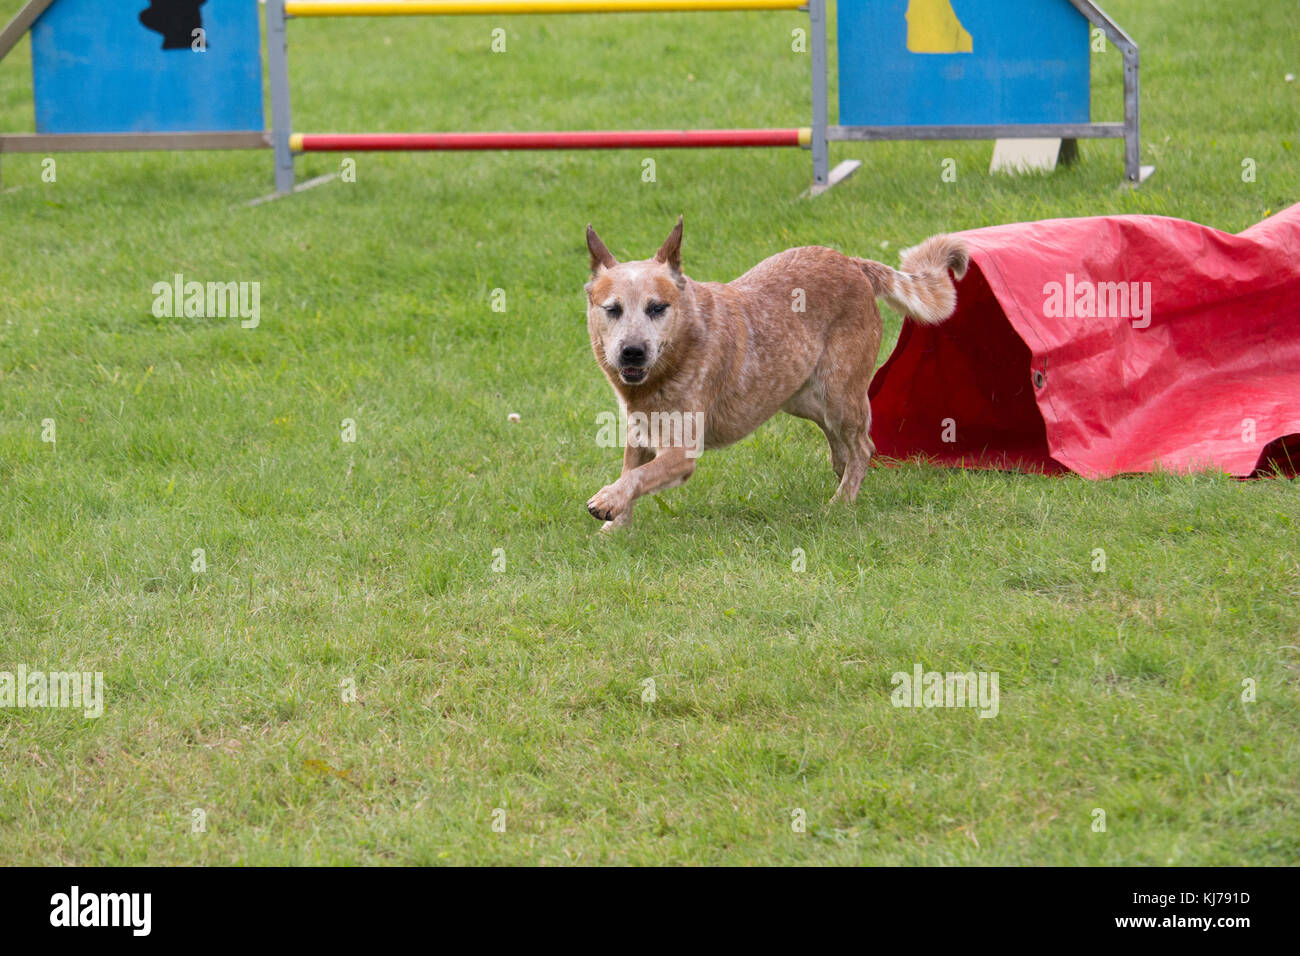 an Australian cattle dog in a canine competition of agility passage in the tunnel Stock Photo